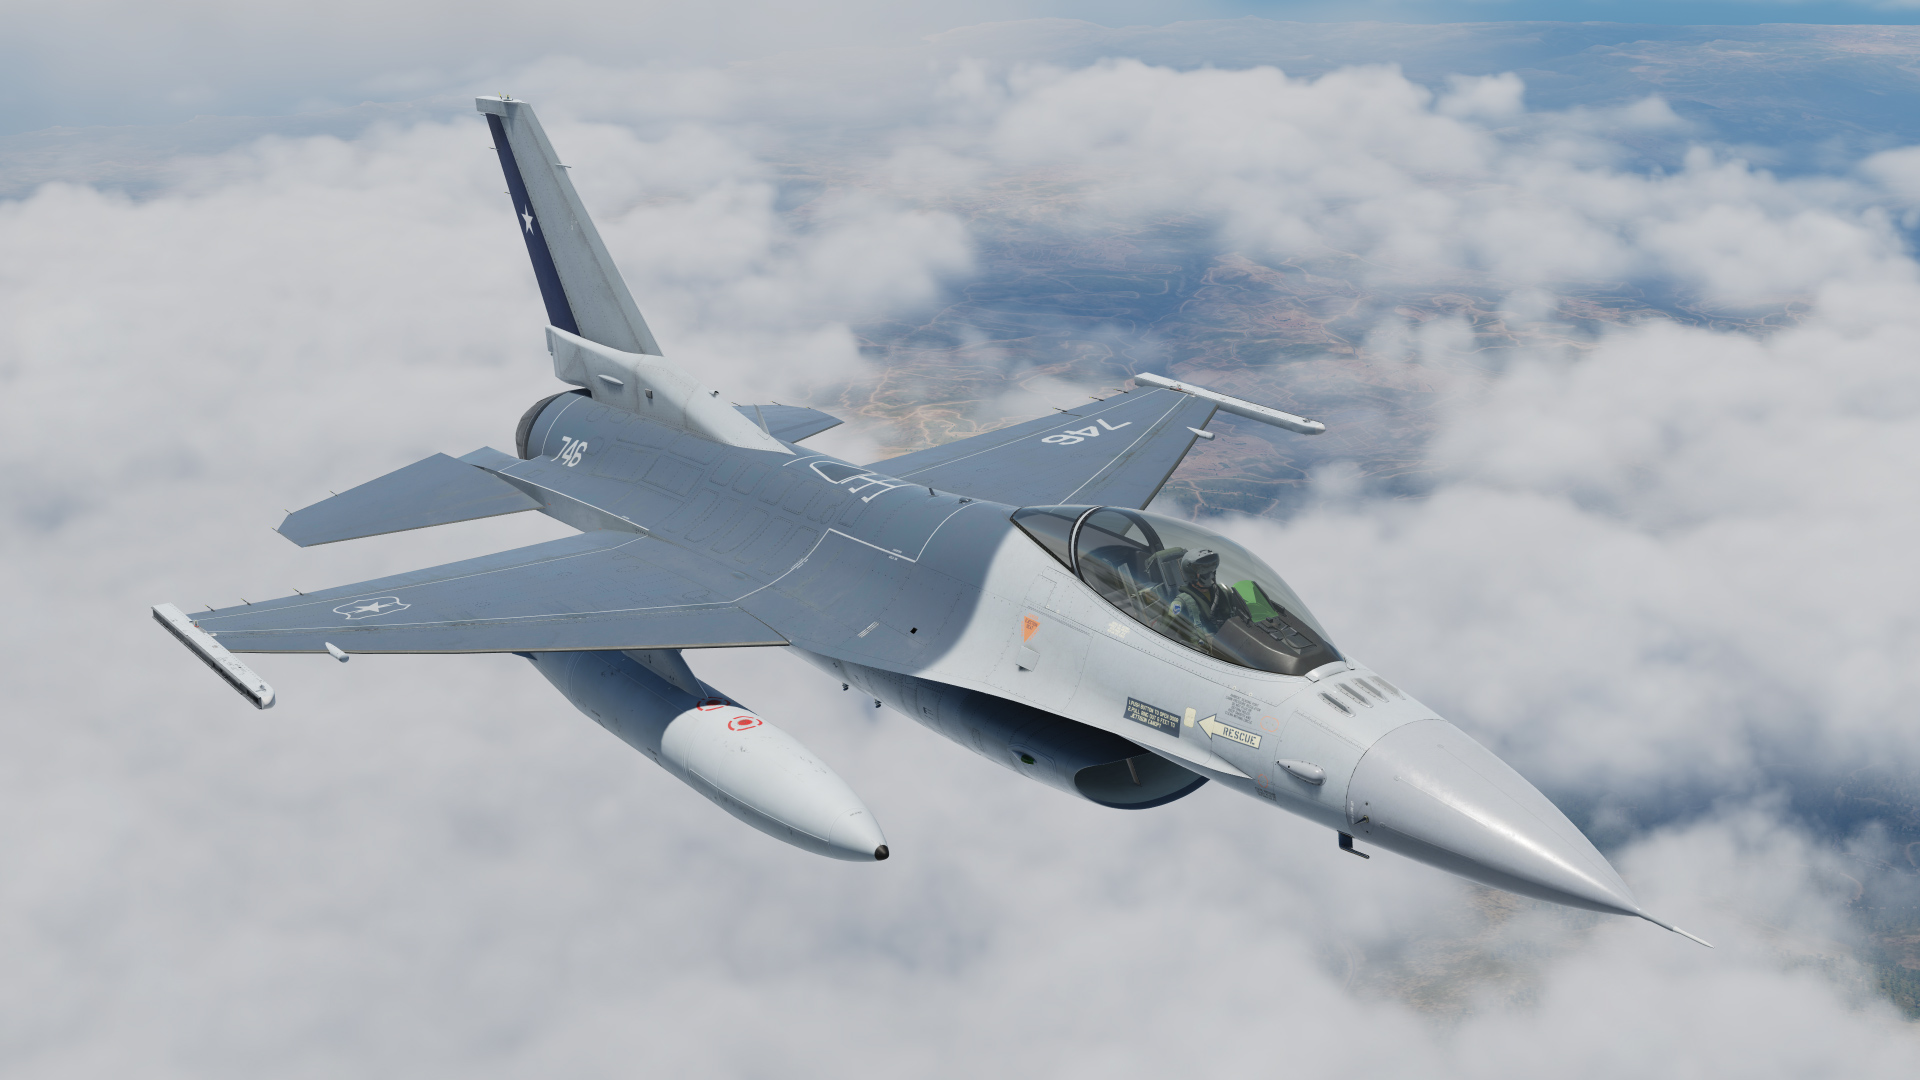 DCS: F-16C Viper in colors of F-16 of Chilean Air Force (FACH) - DCS 2.7